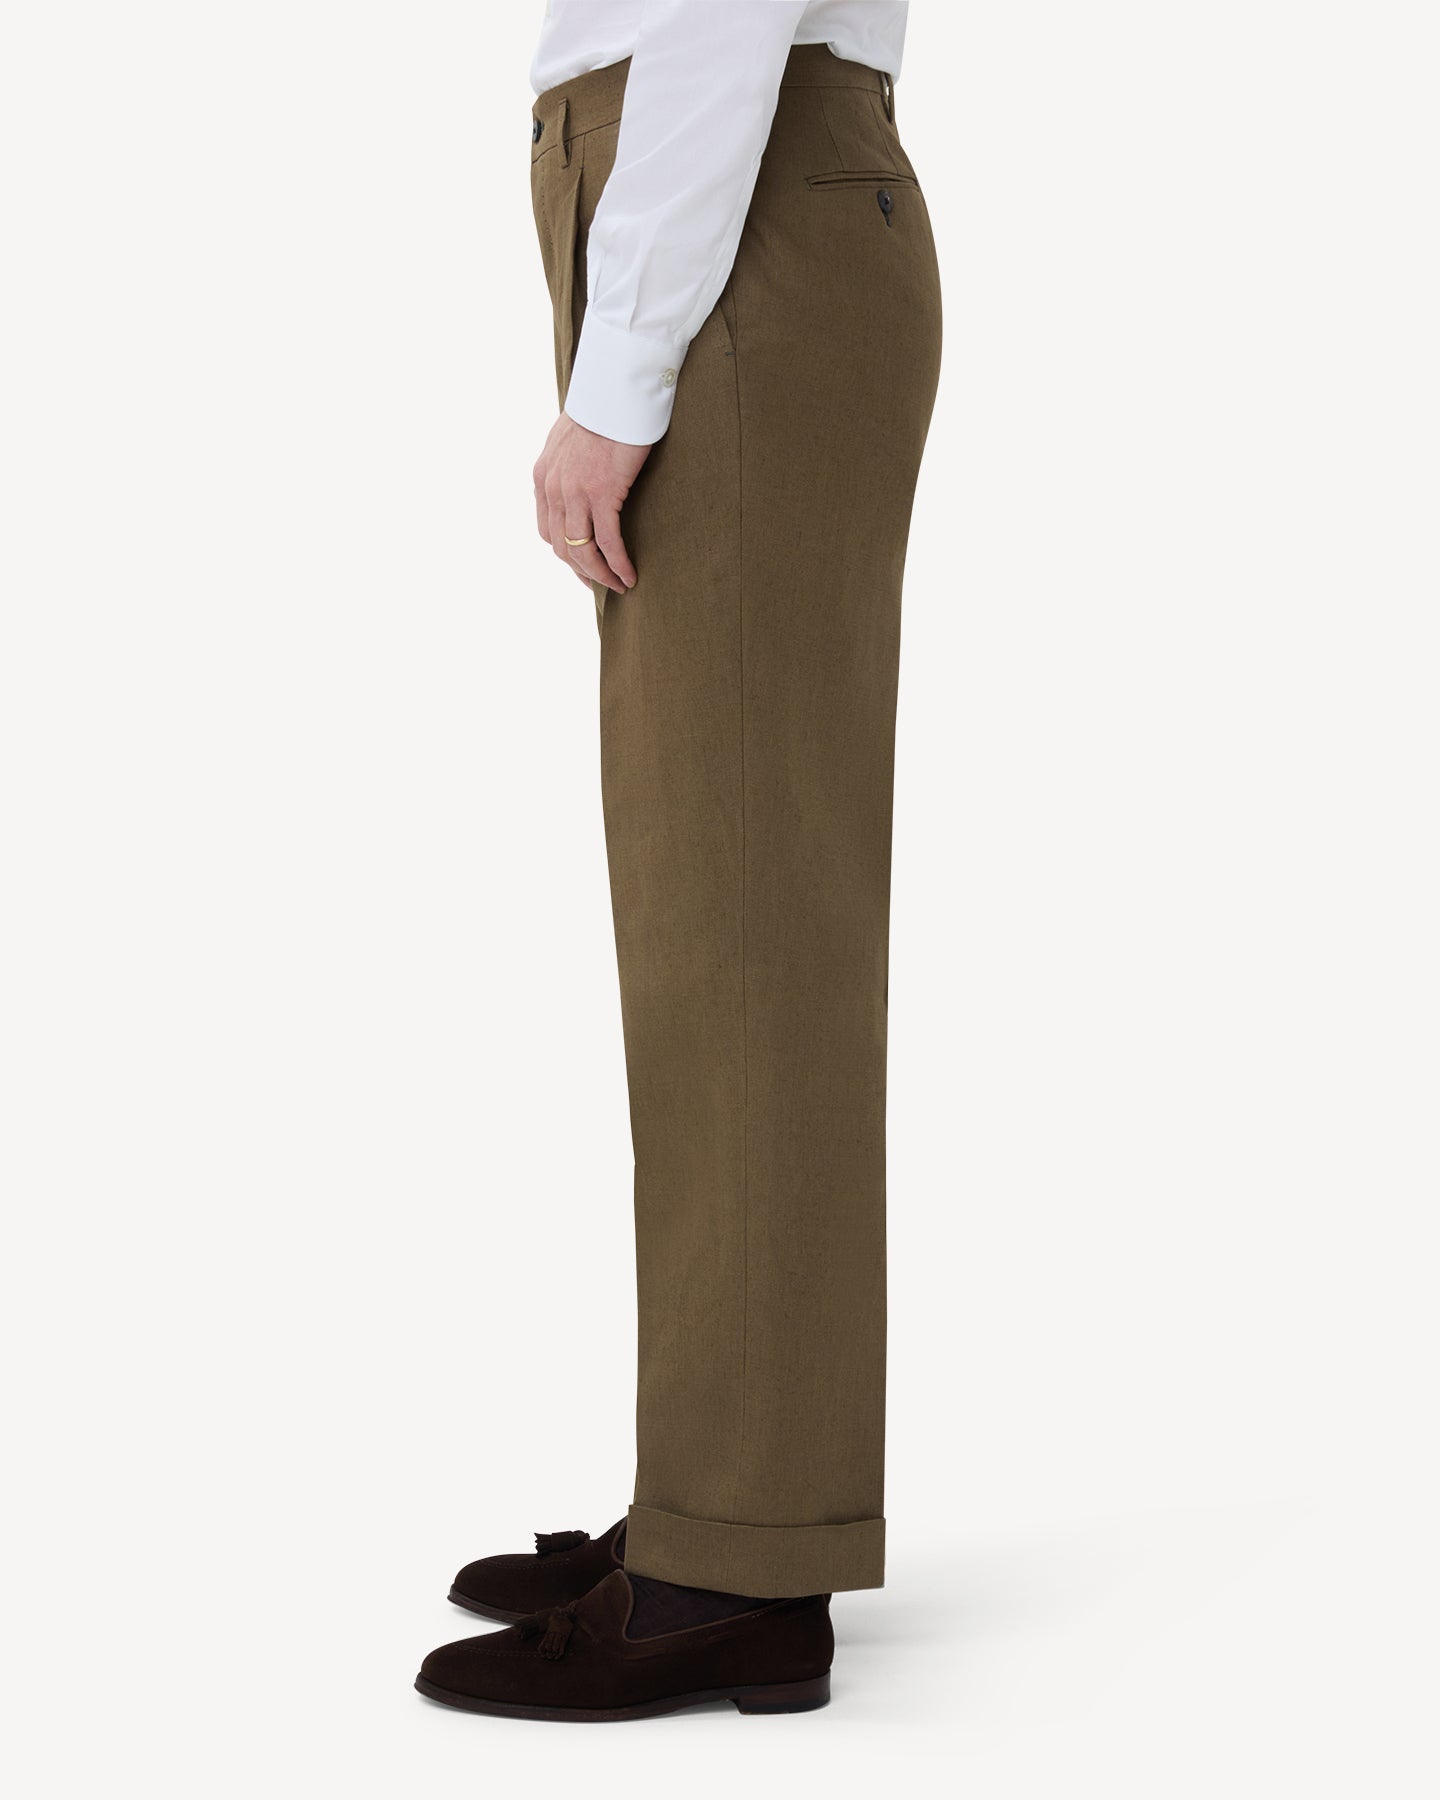 The side of olive brown linen trousers with double pleats and belt loops